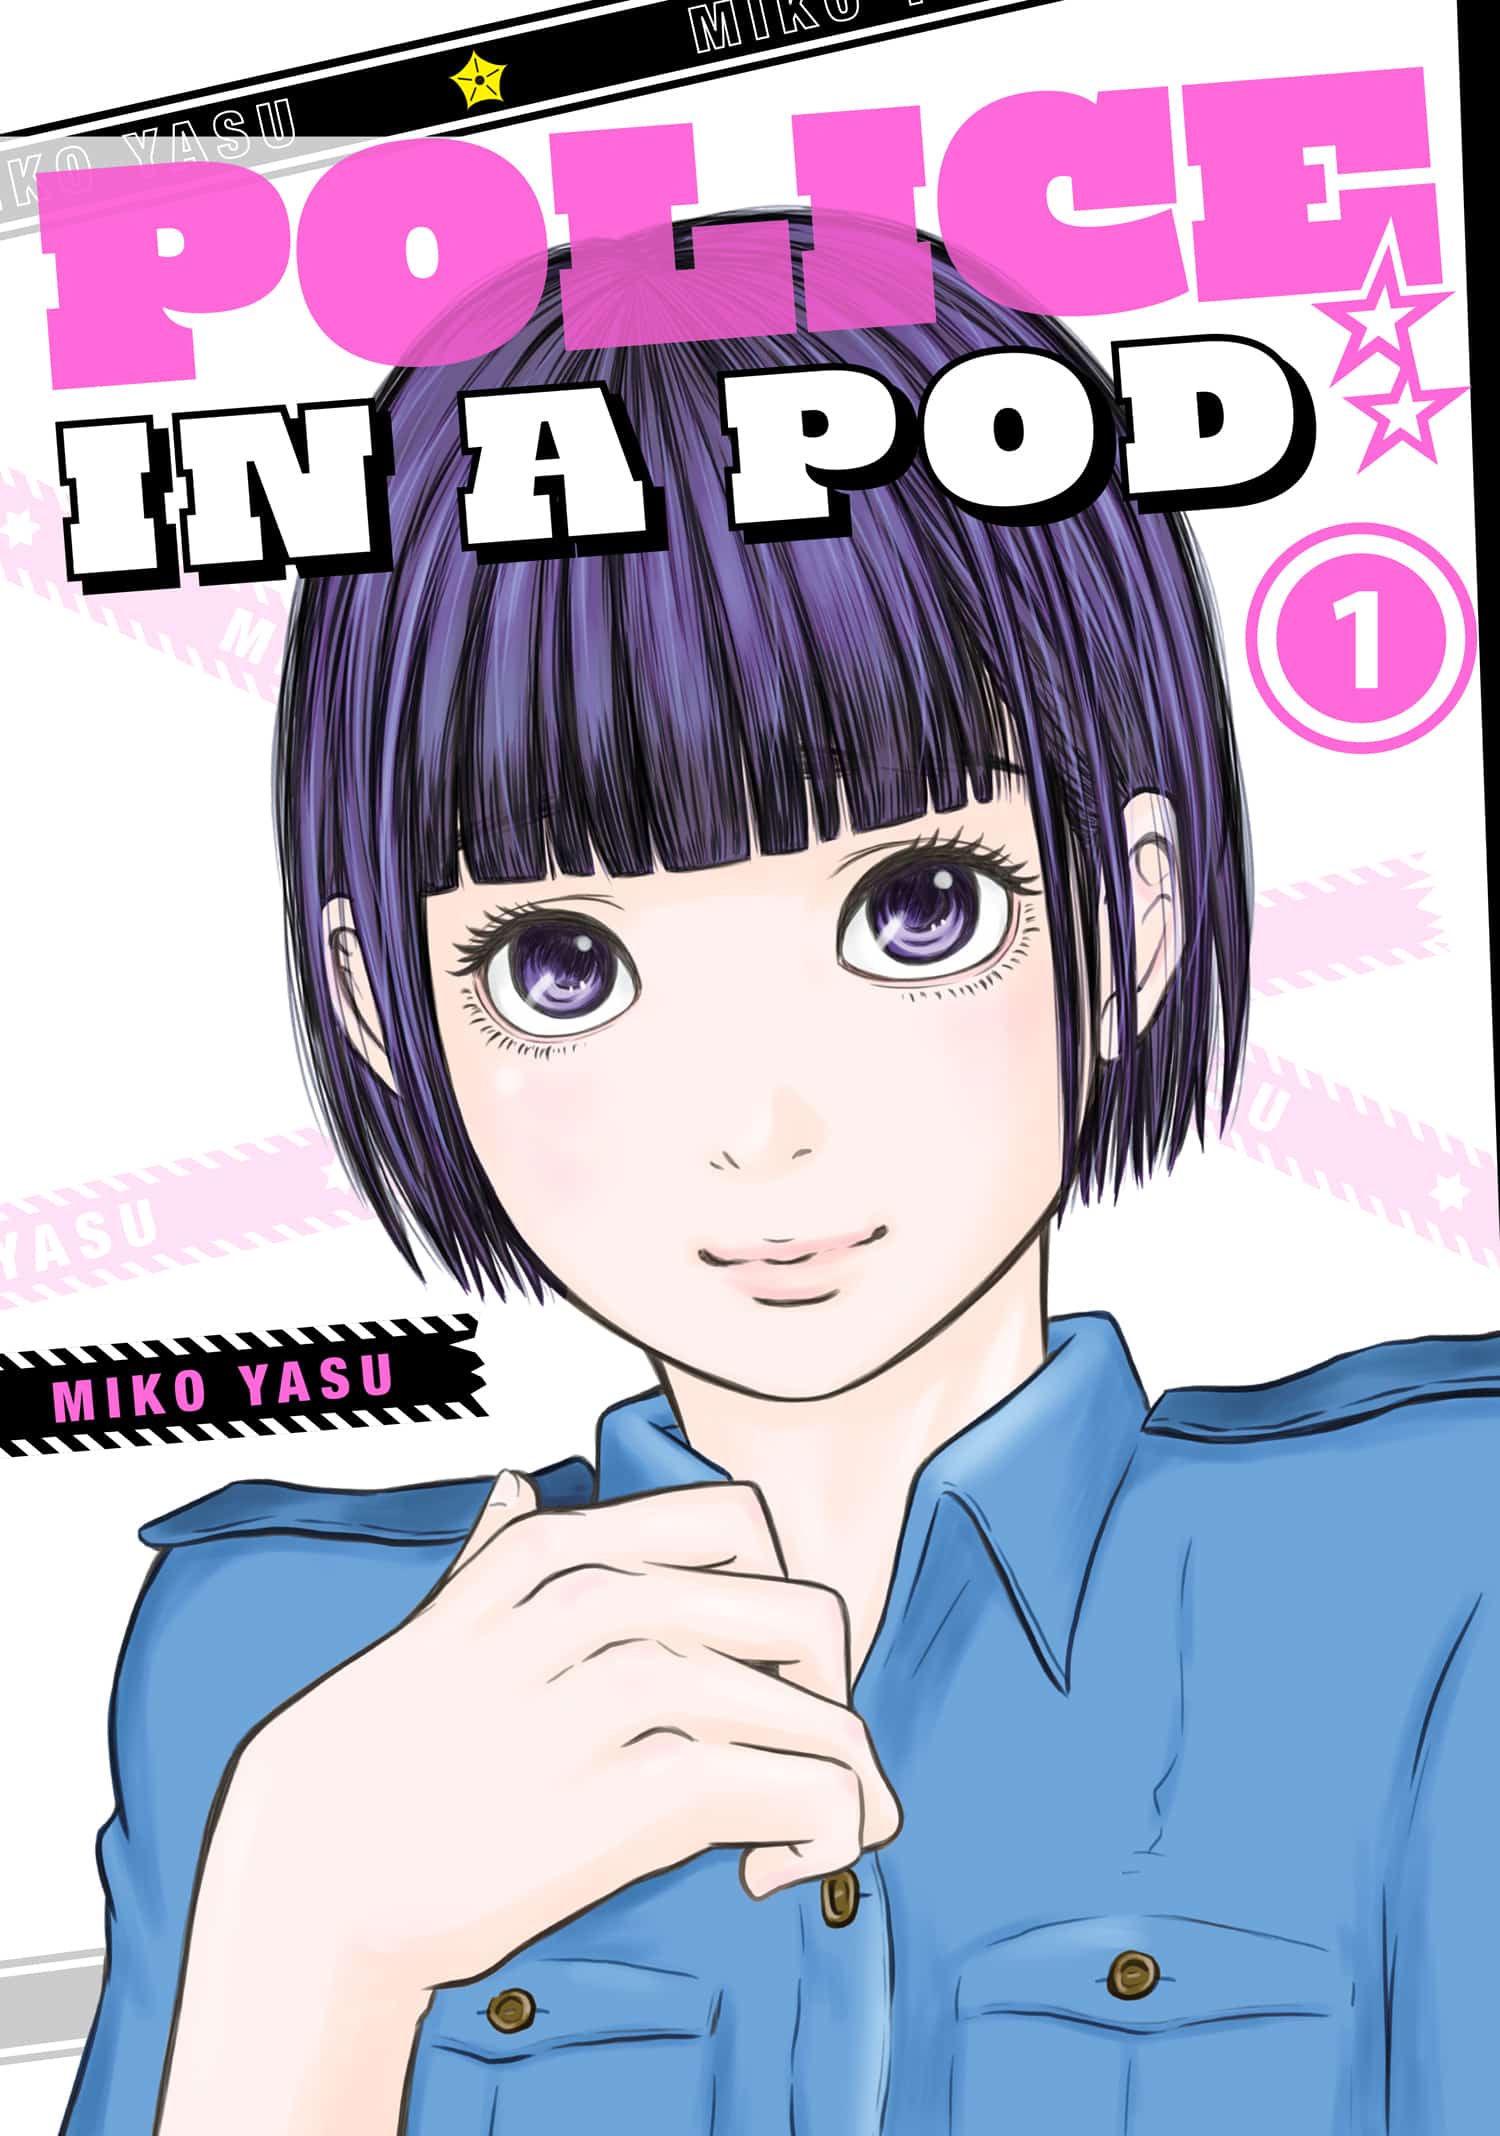 'Police in a Pod' Manga to go on Hiatus as Mangaka Prepares for a New Story